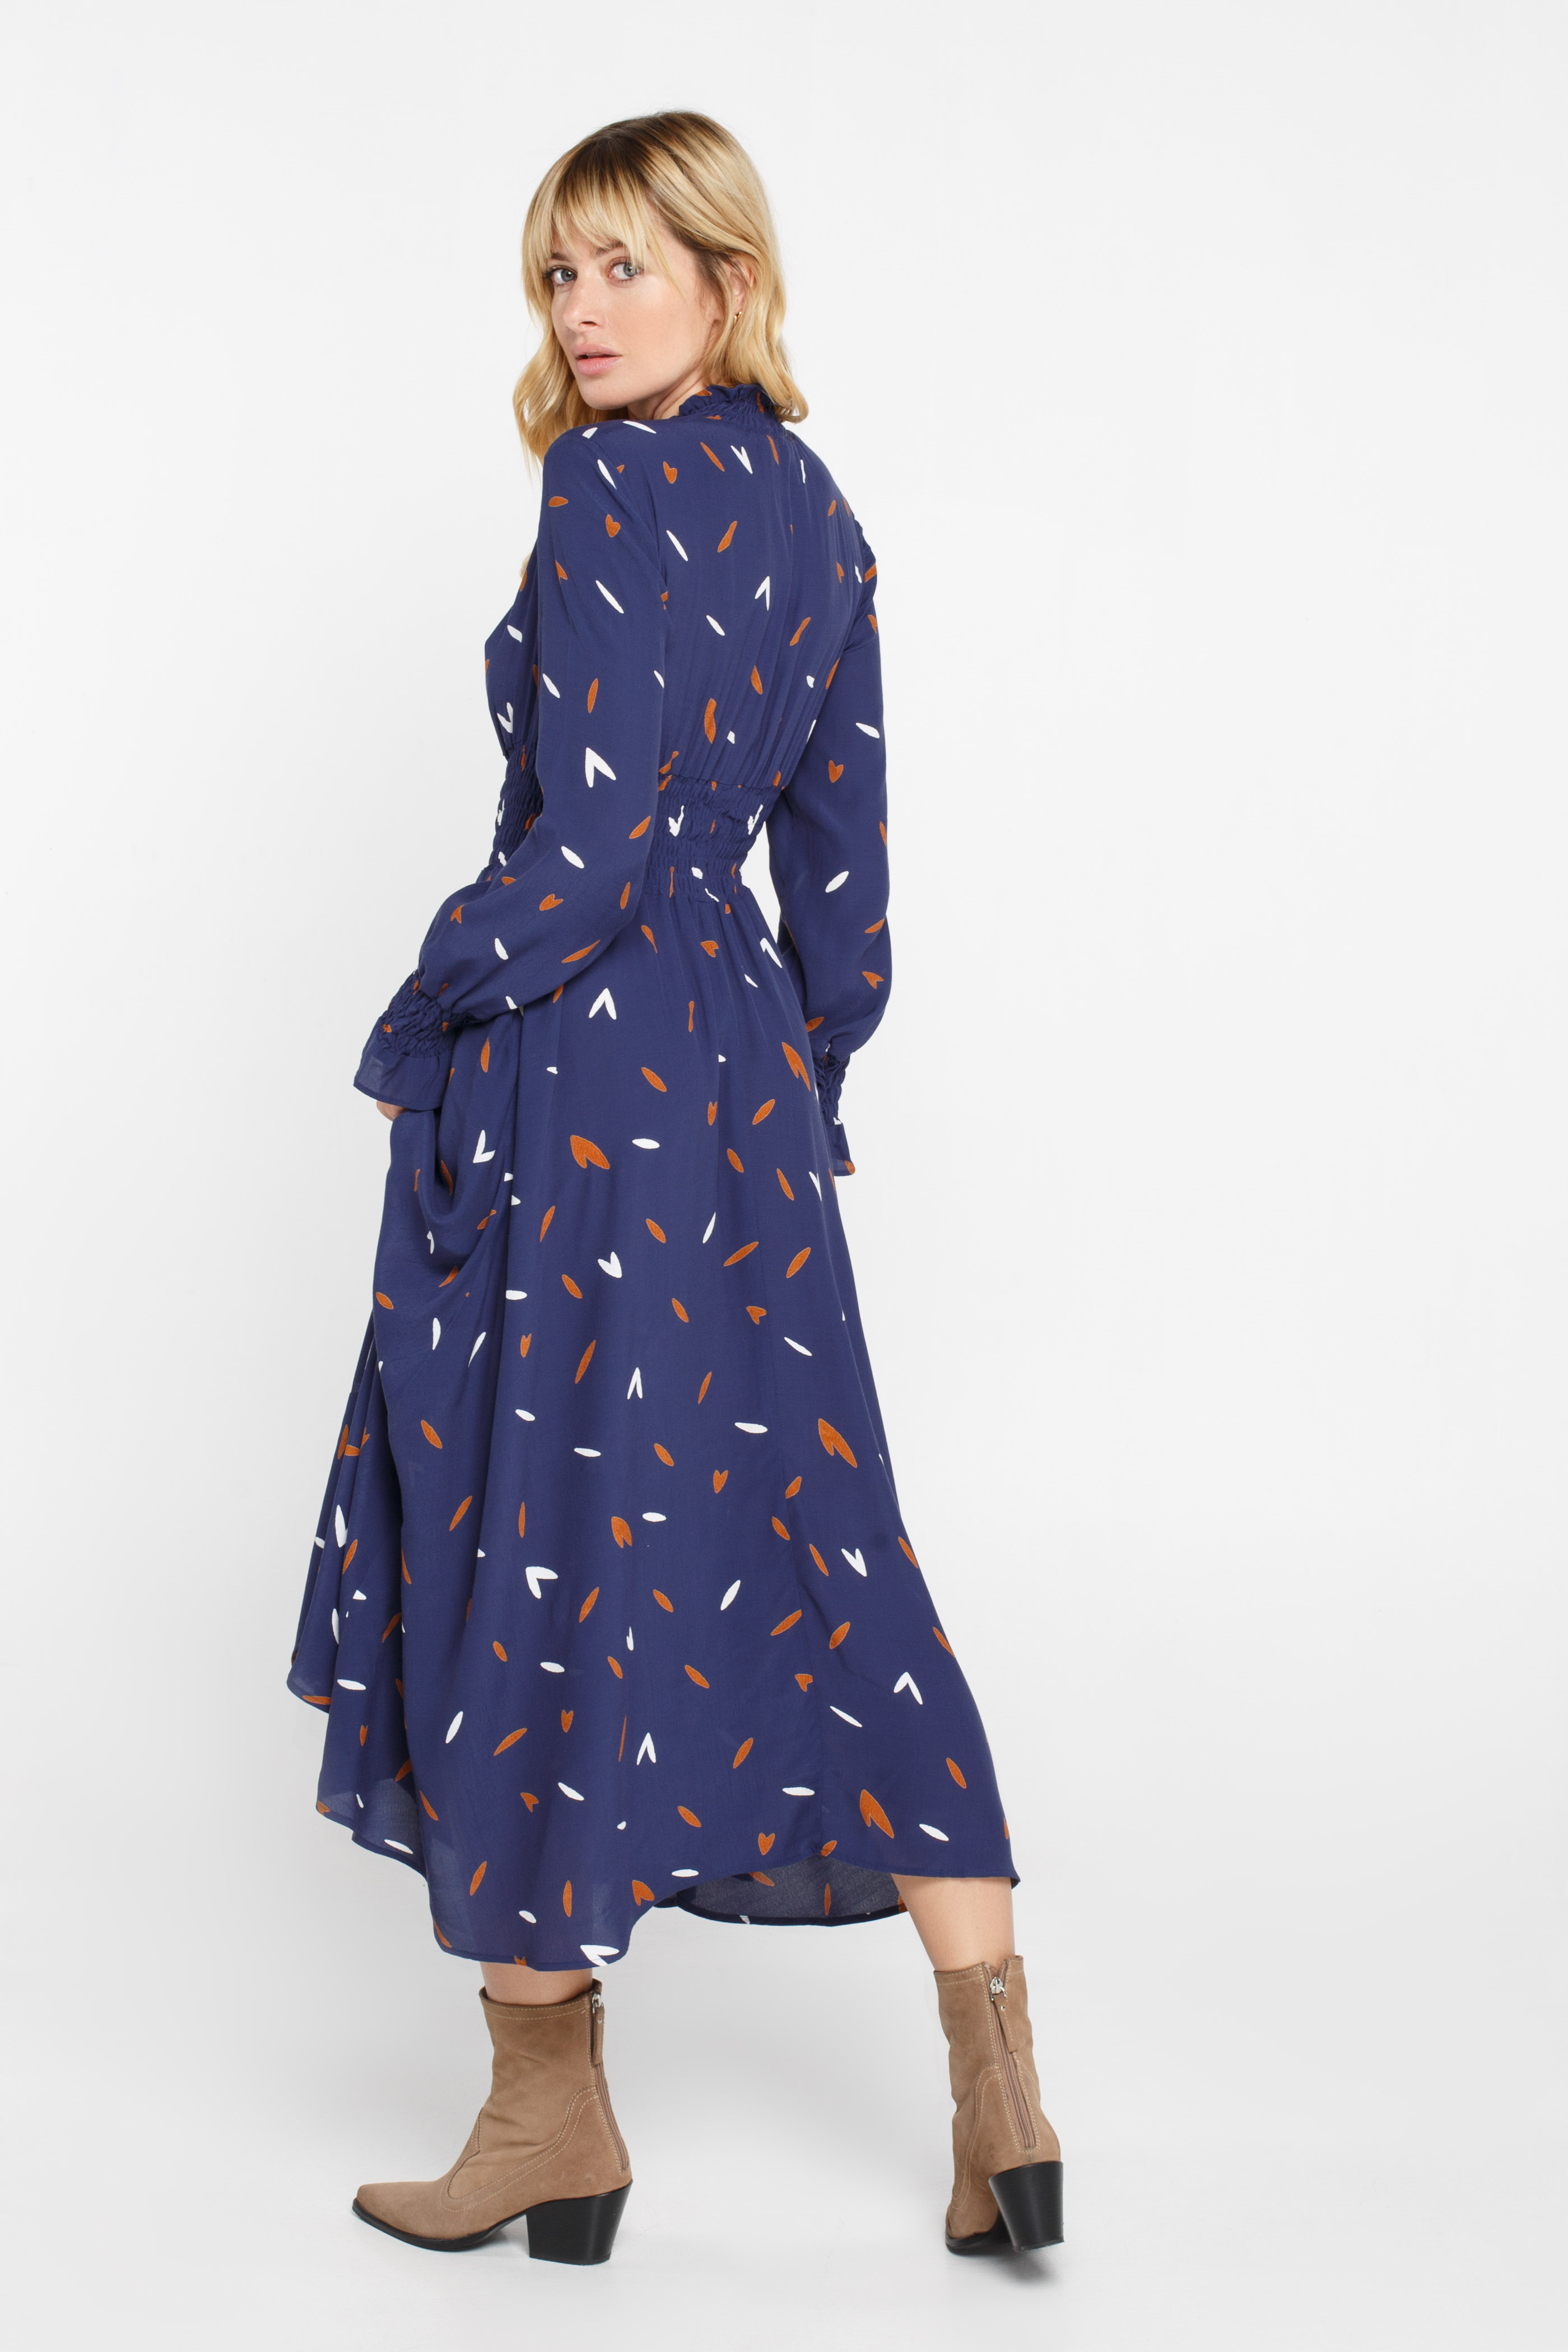 Blue midi dress with elastic waistband and white-brown leaves pattern, photo 4